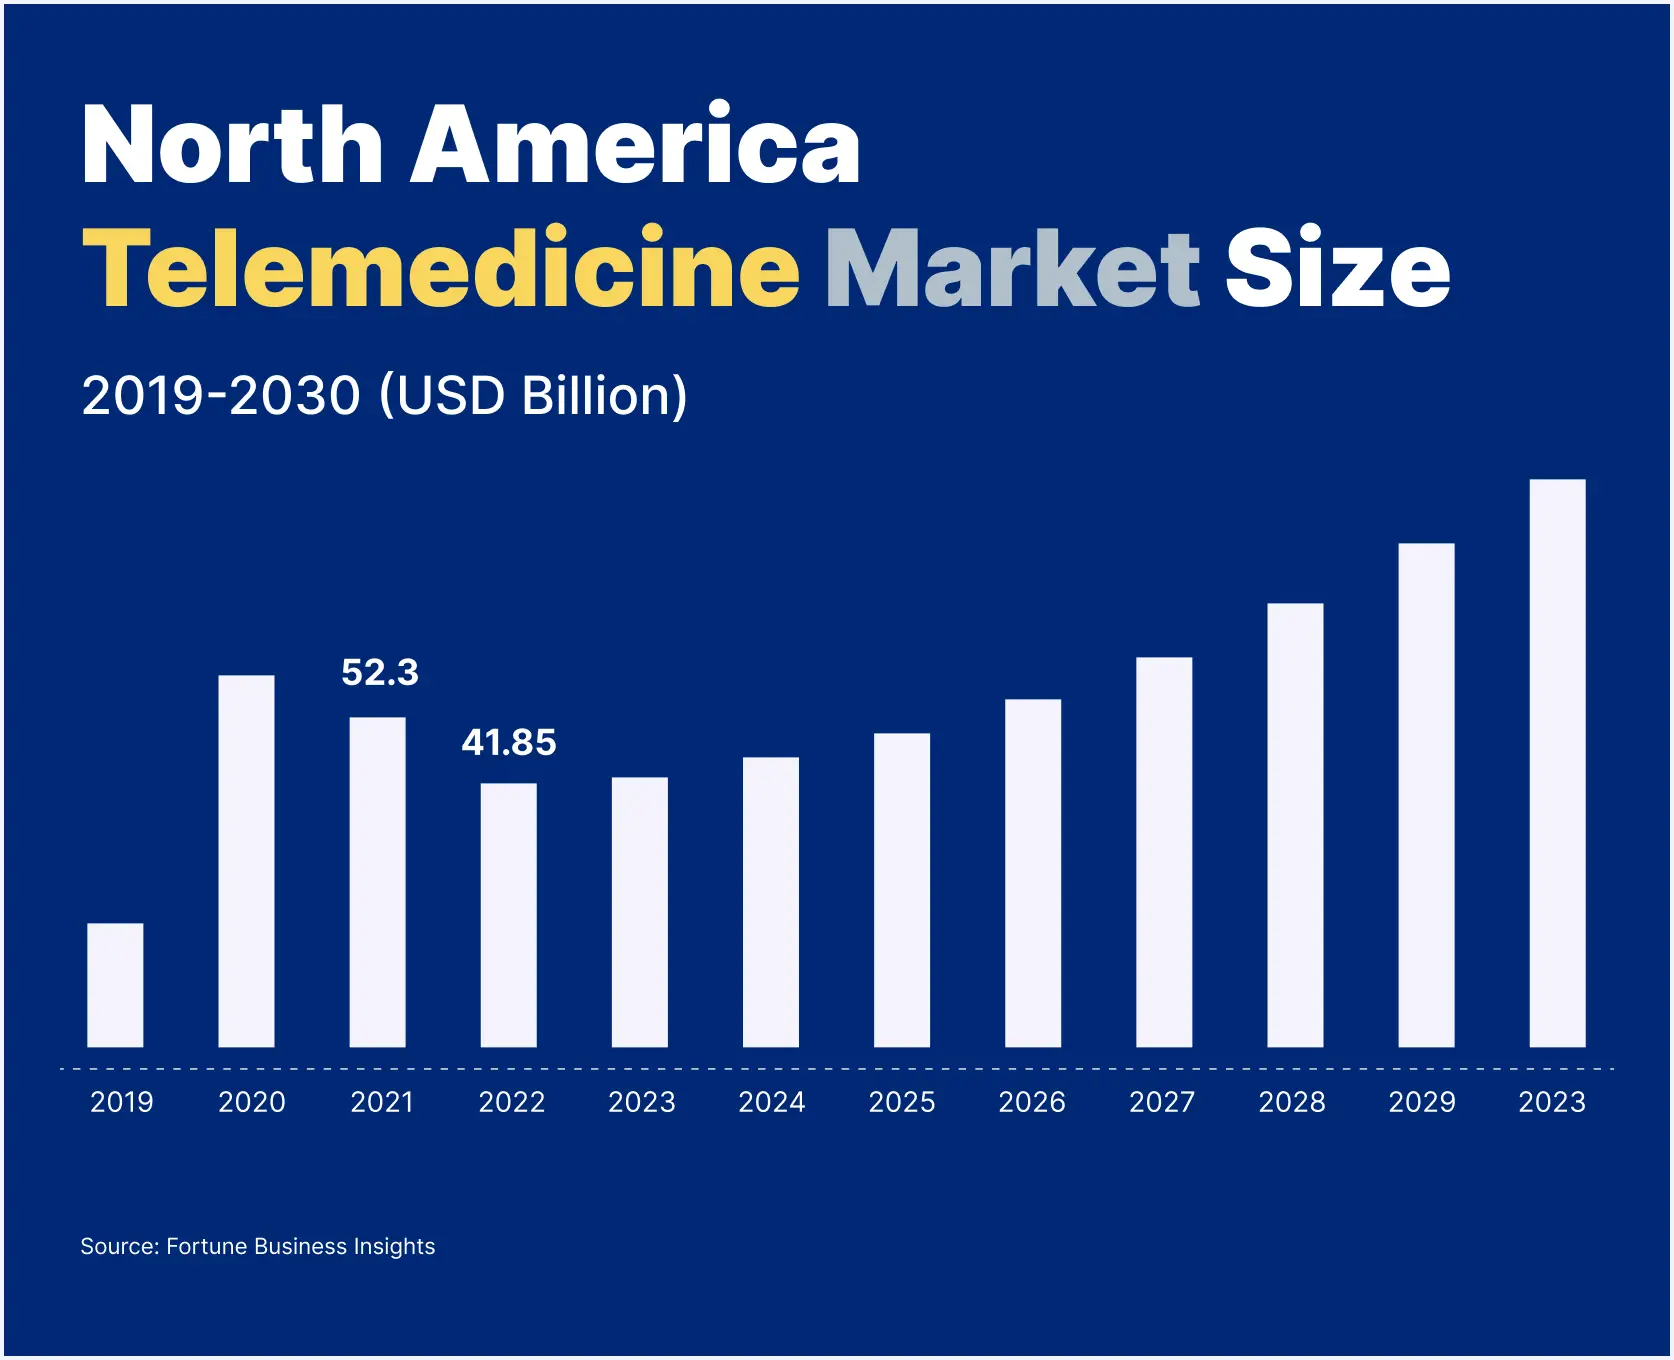 The Rising Popularity and Importance of Telemedicine Apps